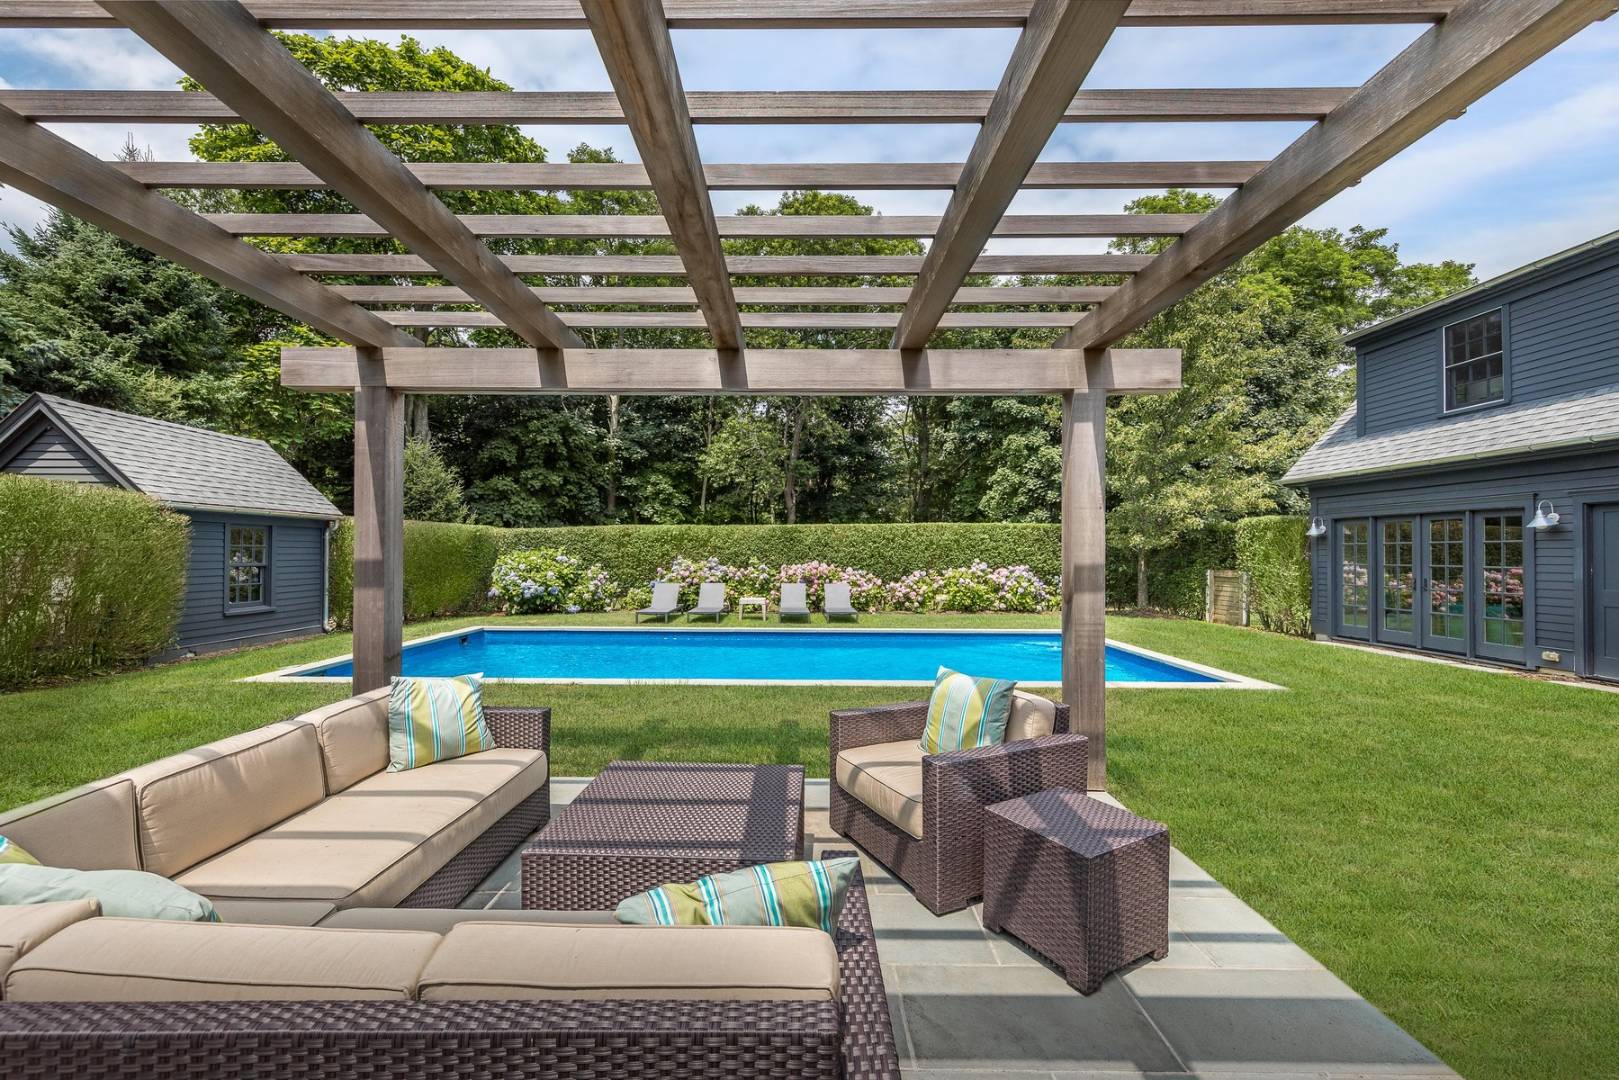 a view of patio with couches and pool